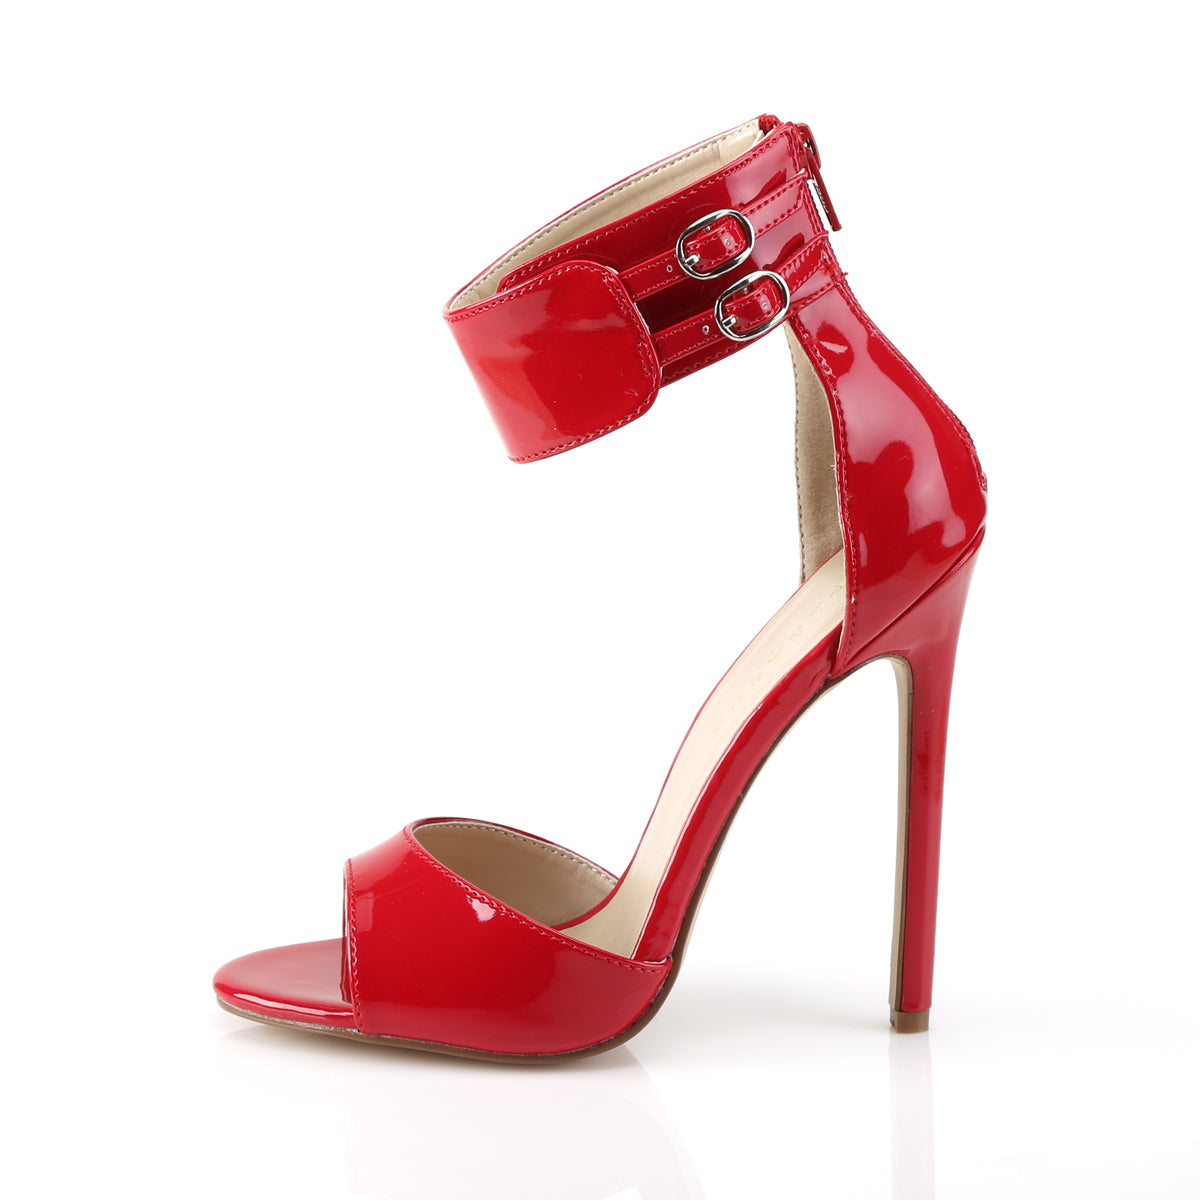 SEXY-19 Pleaser Shoes 5 Inch Heel Red Fetish Footwear-Pleaser- Sexy Shoes Pole Dance Heels